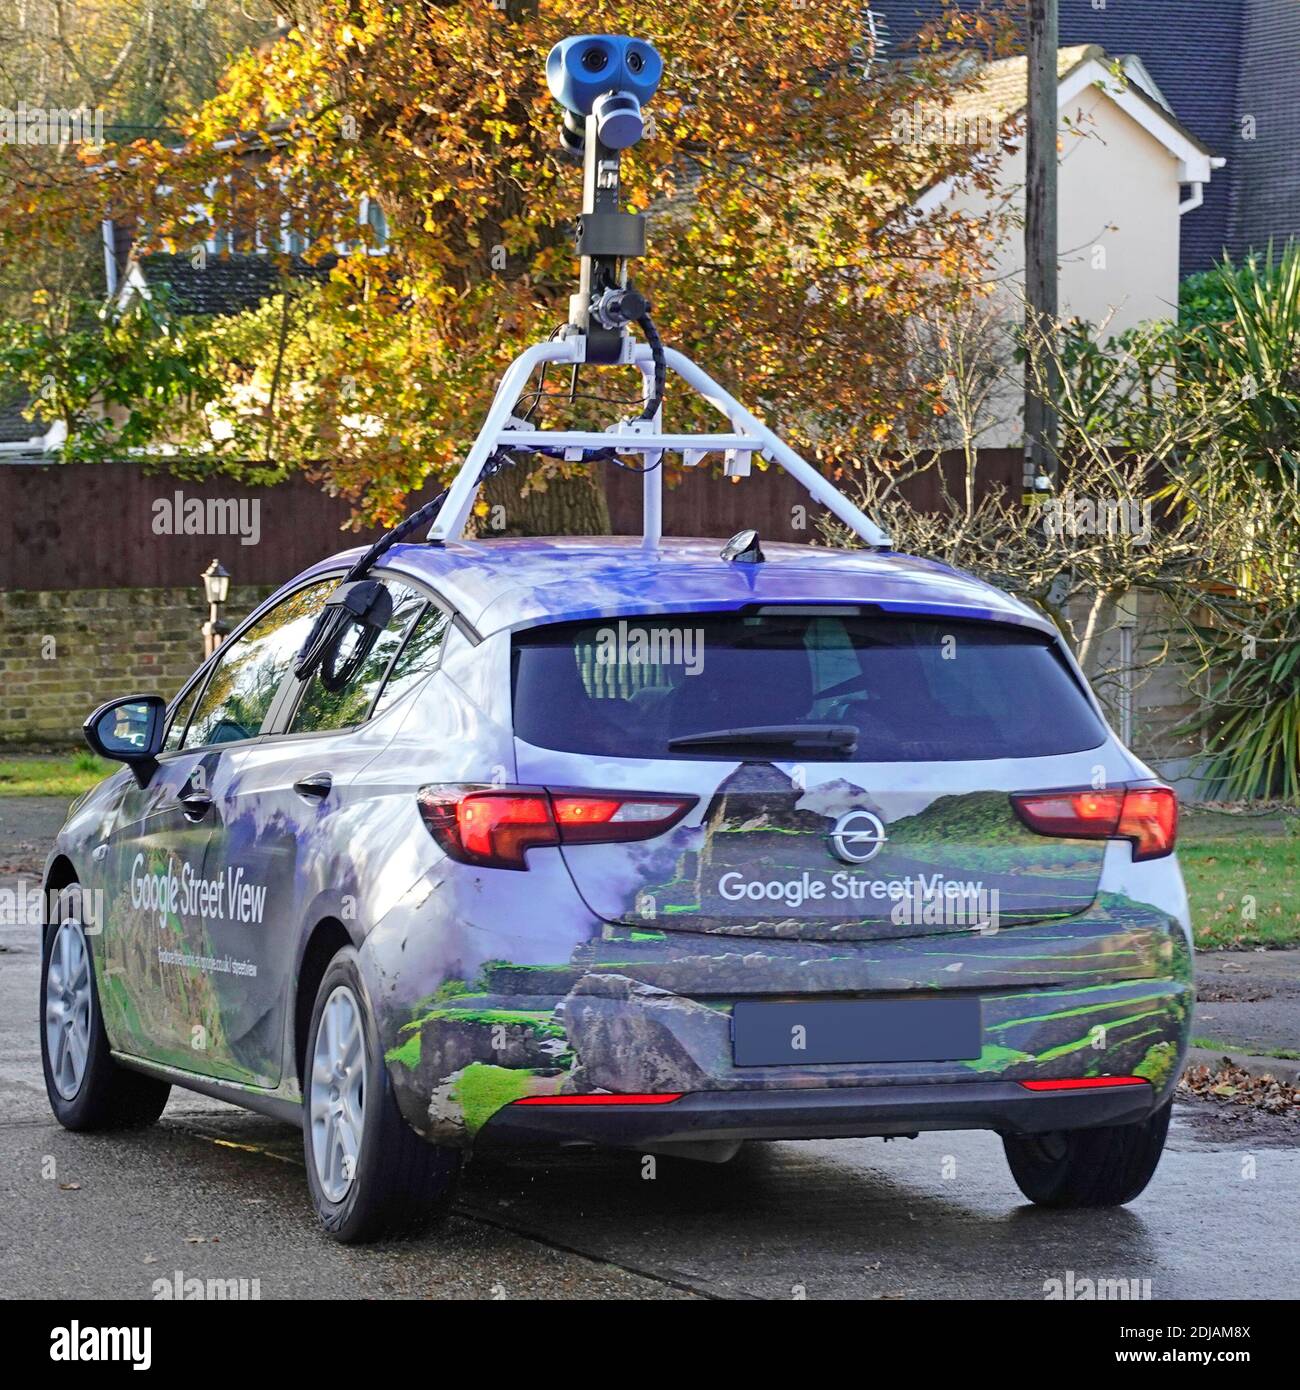 Close up back of Google car & video camera rig fixed into vehicle roof filming street view pegman map images driving residential road Essex England UK Stock Photo